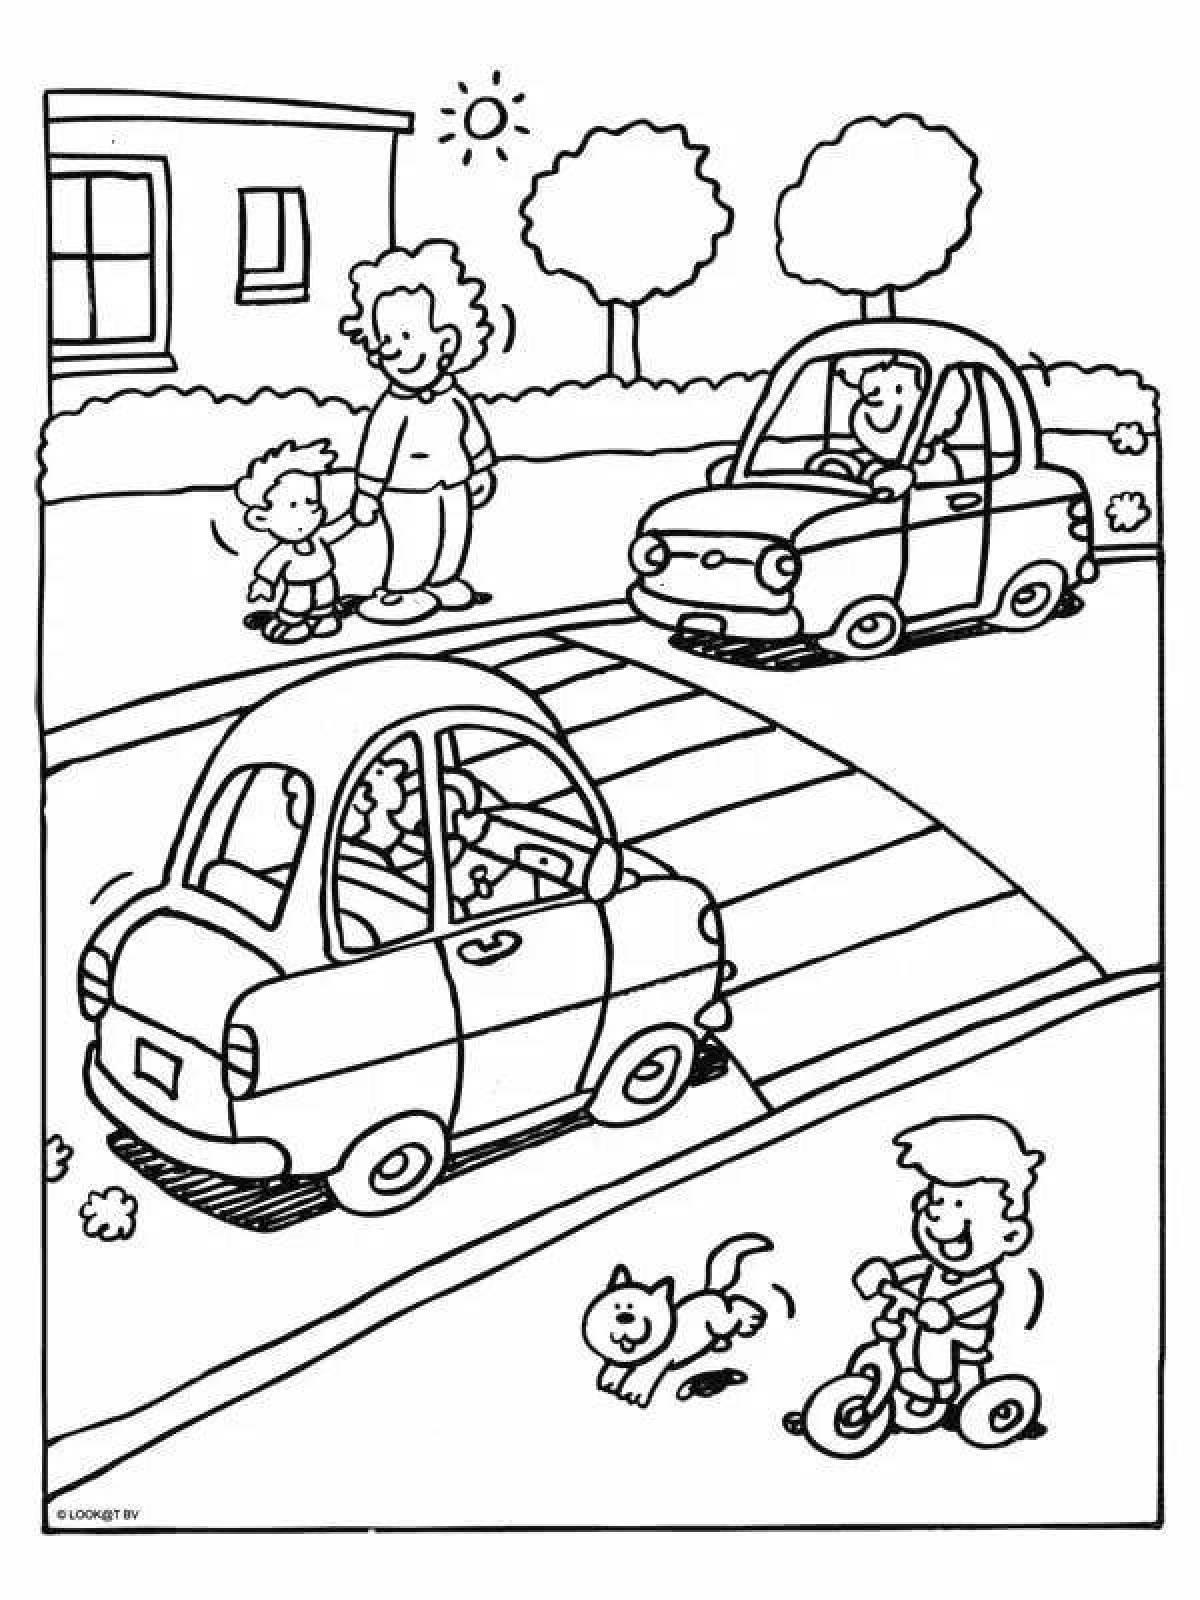 Colorful traffic rules coloring page for 5-6 year olds